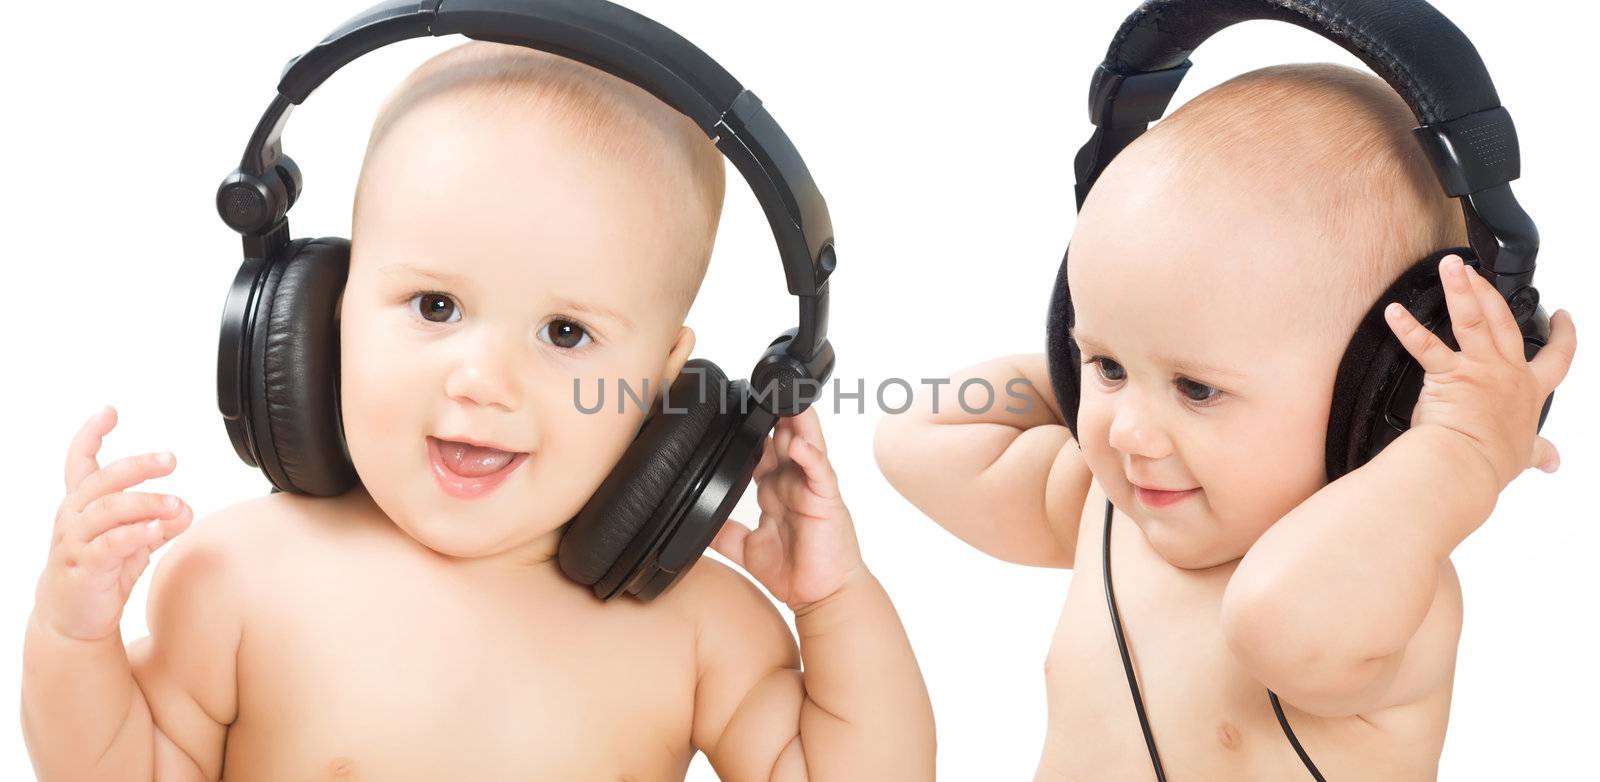 Smiling baby with headphone by Bedolaga